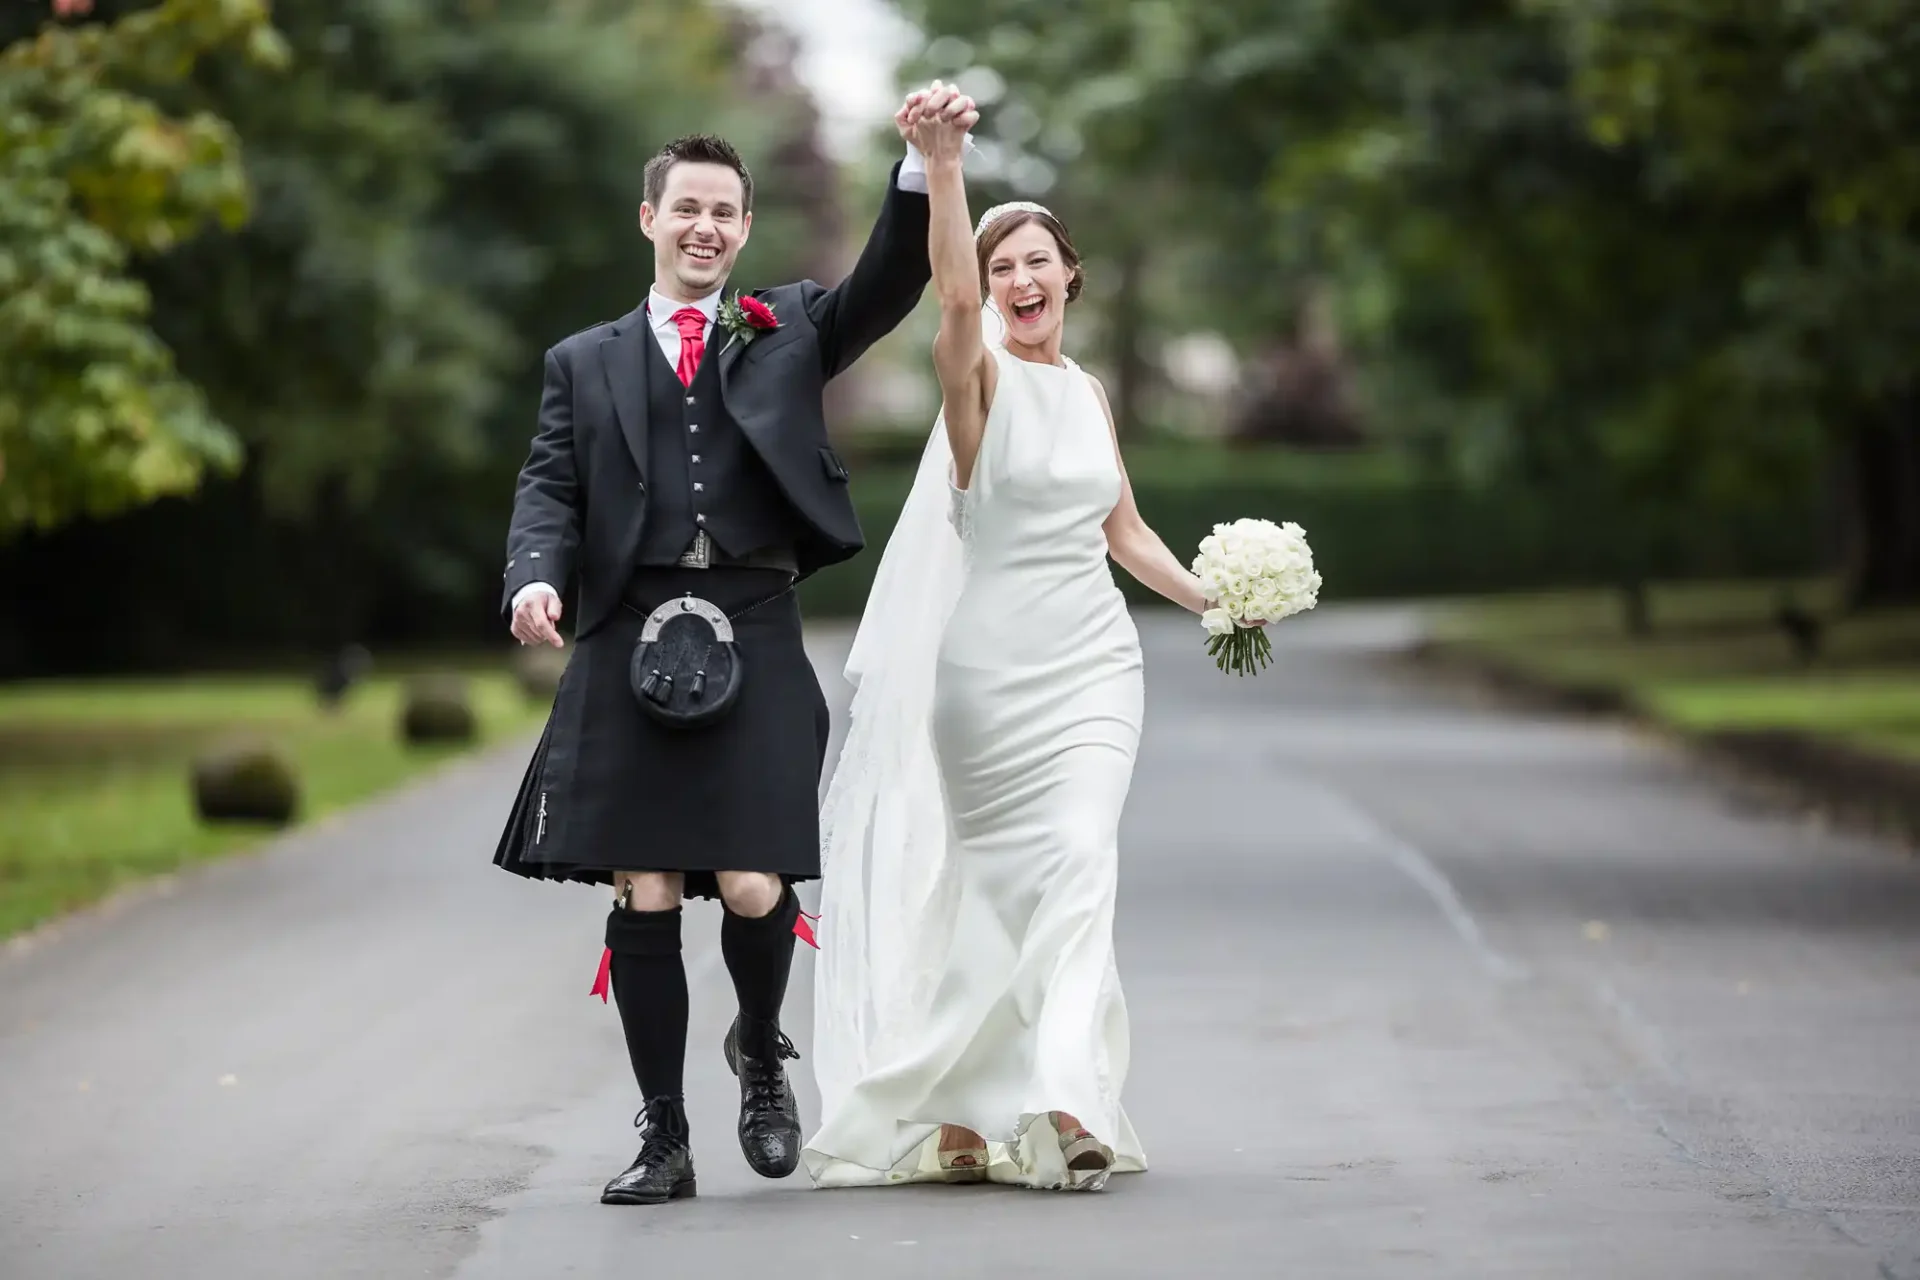 City Chambers wedding photographer prices of a joyful couple, with the groom in a kilt and the bride in a white gown, walk hand-in-hand down a tree-lined path, celebrating their wedding day